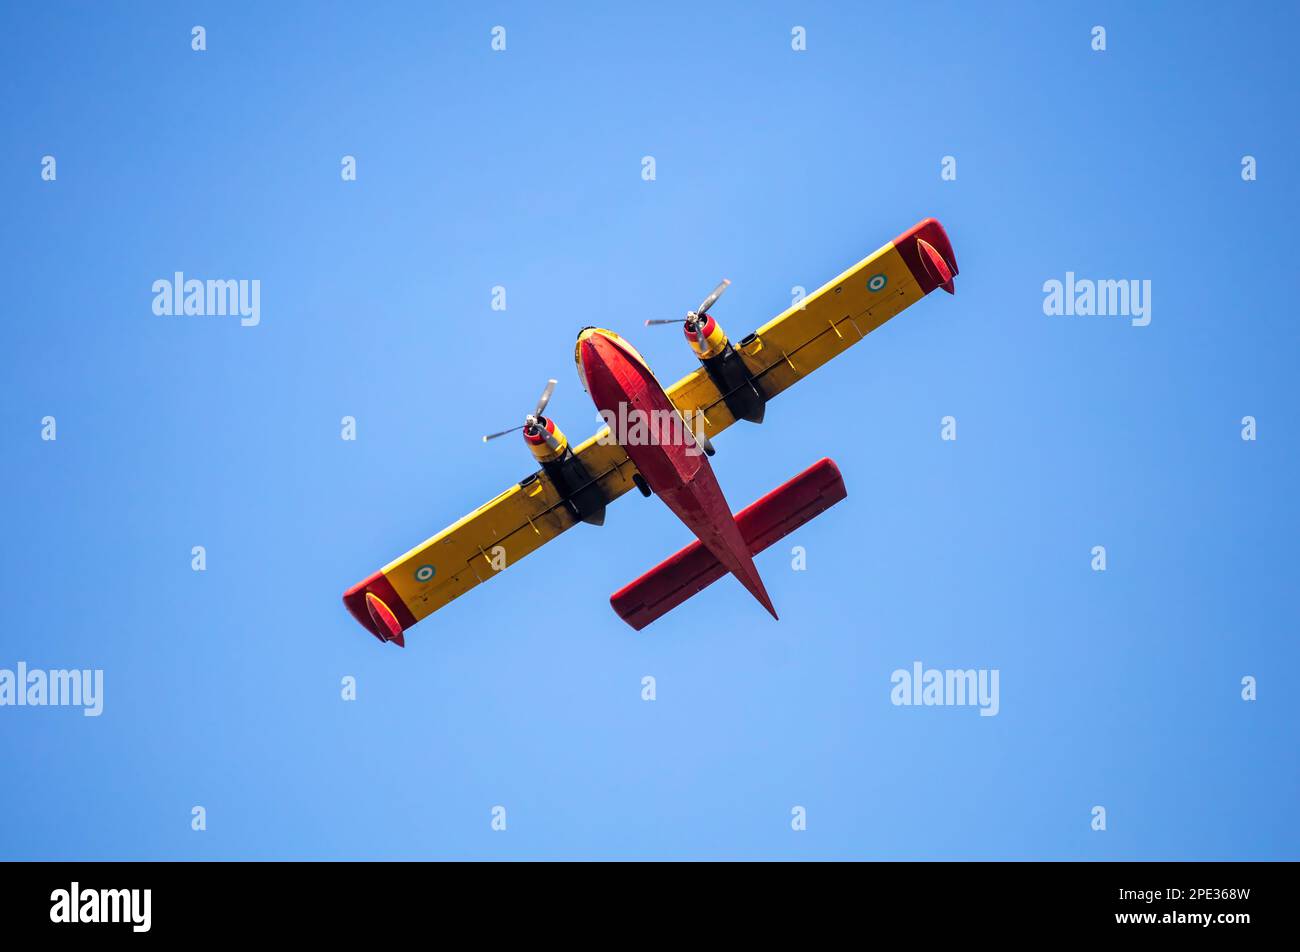 Canadair Firefight Aircraft, Scooper flying on blue sky background, under view. Yellow red color seaplane flight for rescue and transport. Stock Photo